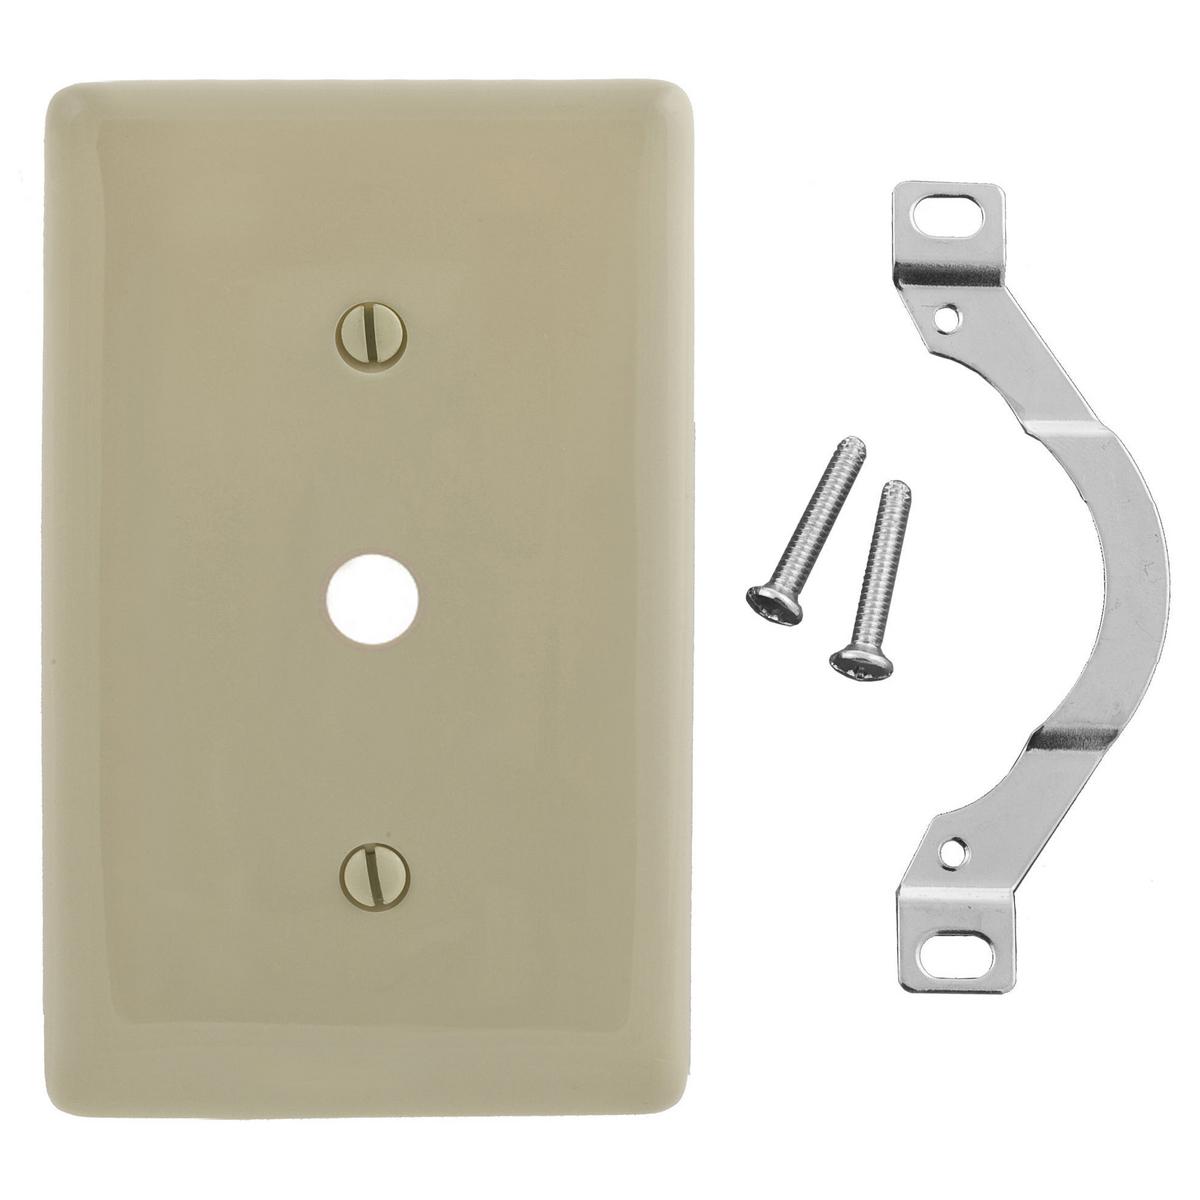 Hubbell NP12I Wallplates and Box Covers, Wallplate, Nylon, 1-Gang, .406" Opening, Strap Mount, Light Almond  ; Reinforcement ribs for extra strength ; High-impact, self-extinguishing nylon material ; Captive screw feature holds mounting screw in place ; Standard Size i